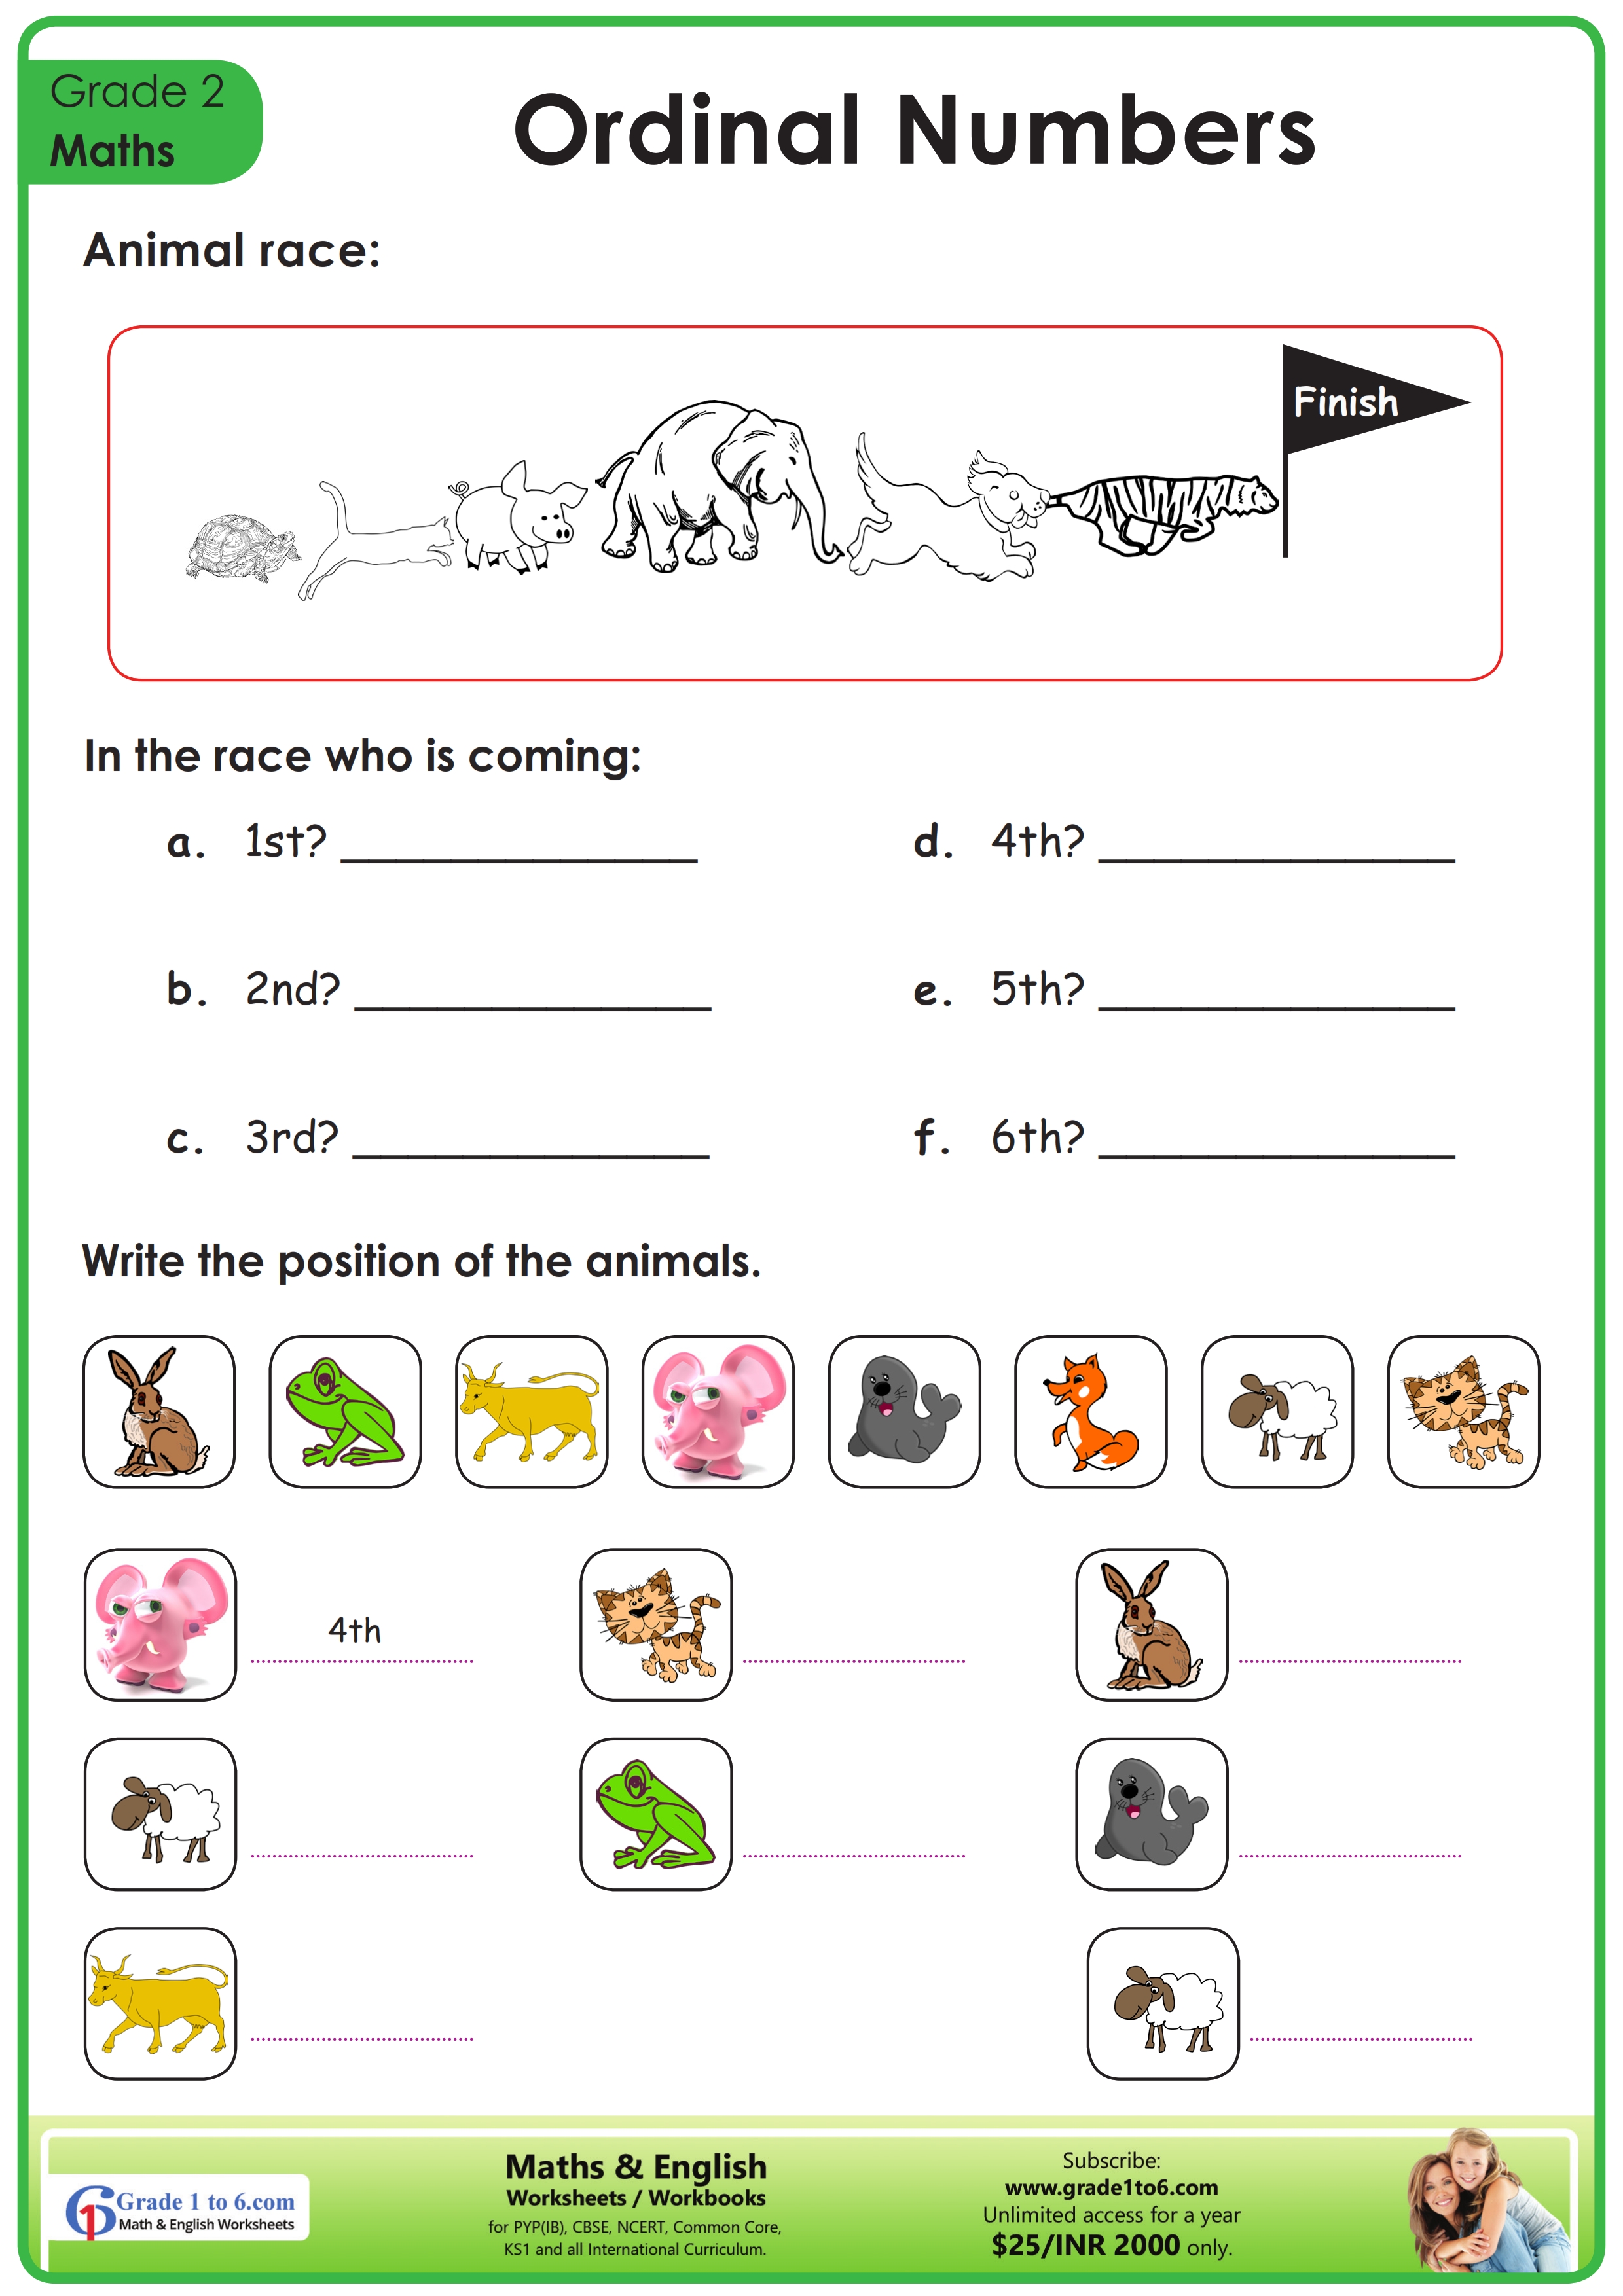 understand-ordinal-numbers-with-our-worksheet-style-worksheets